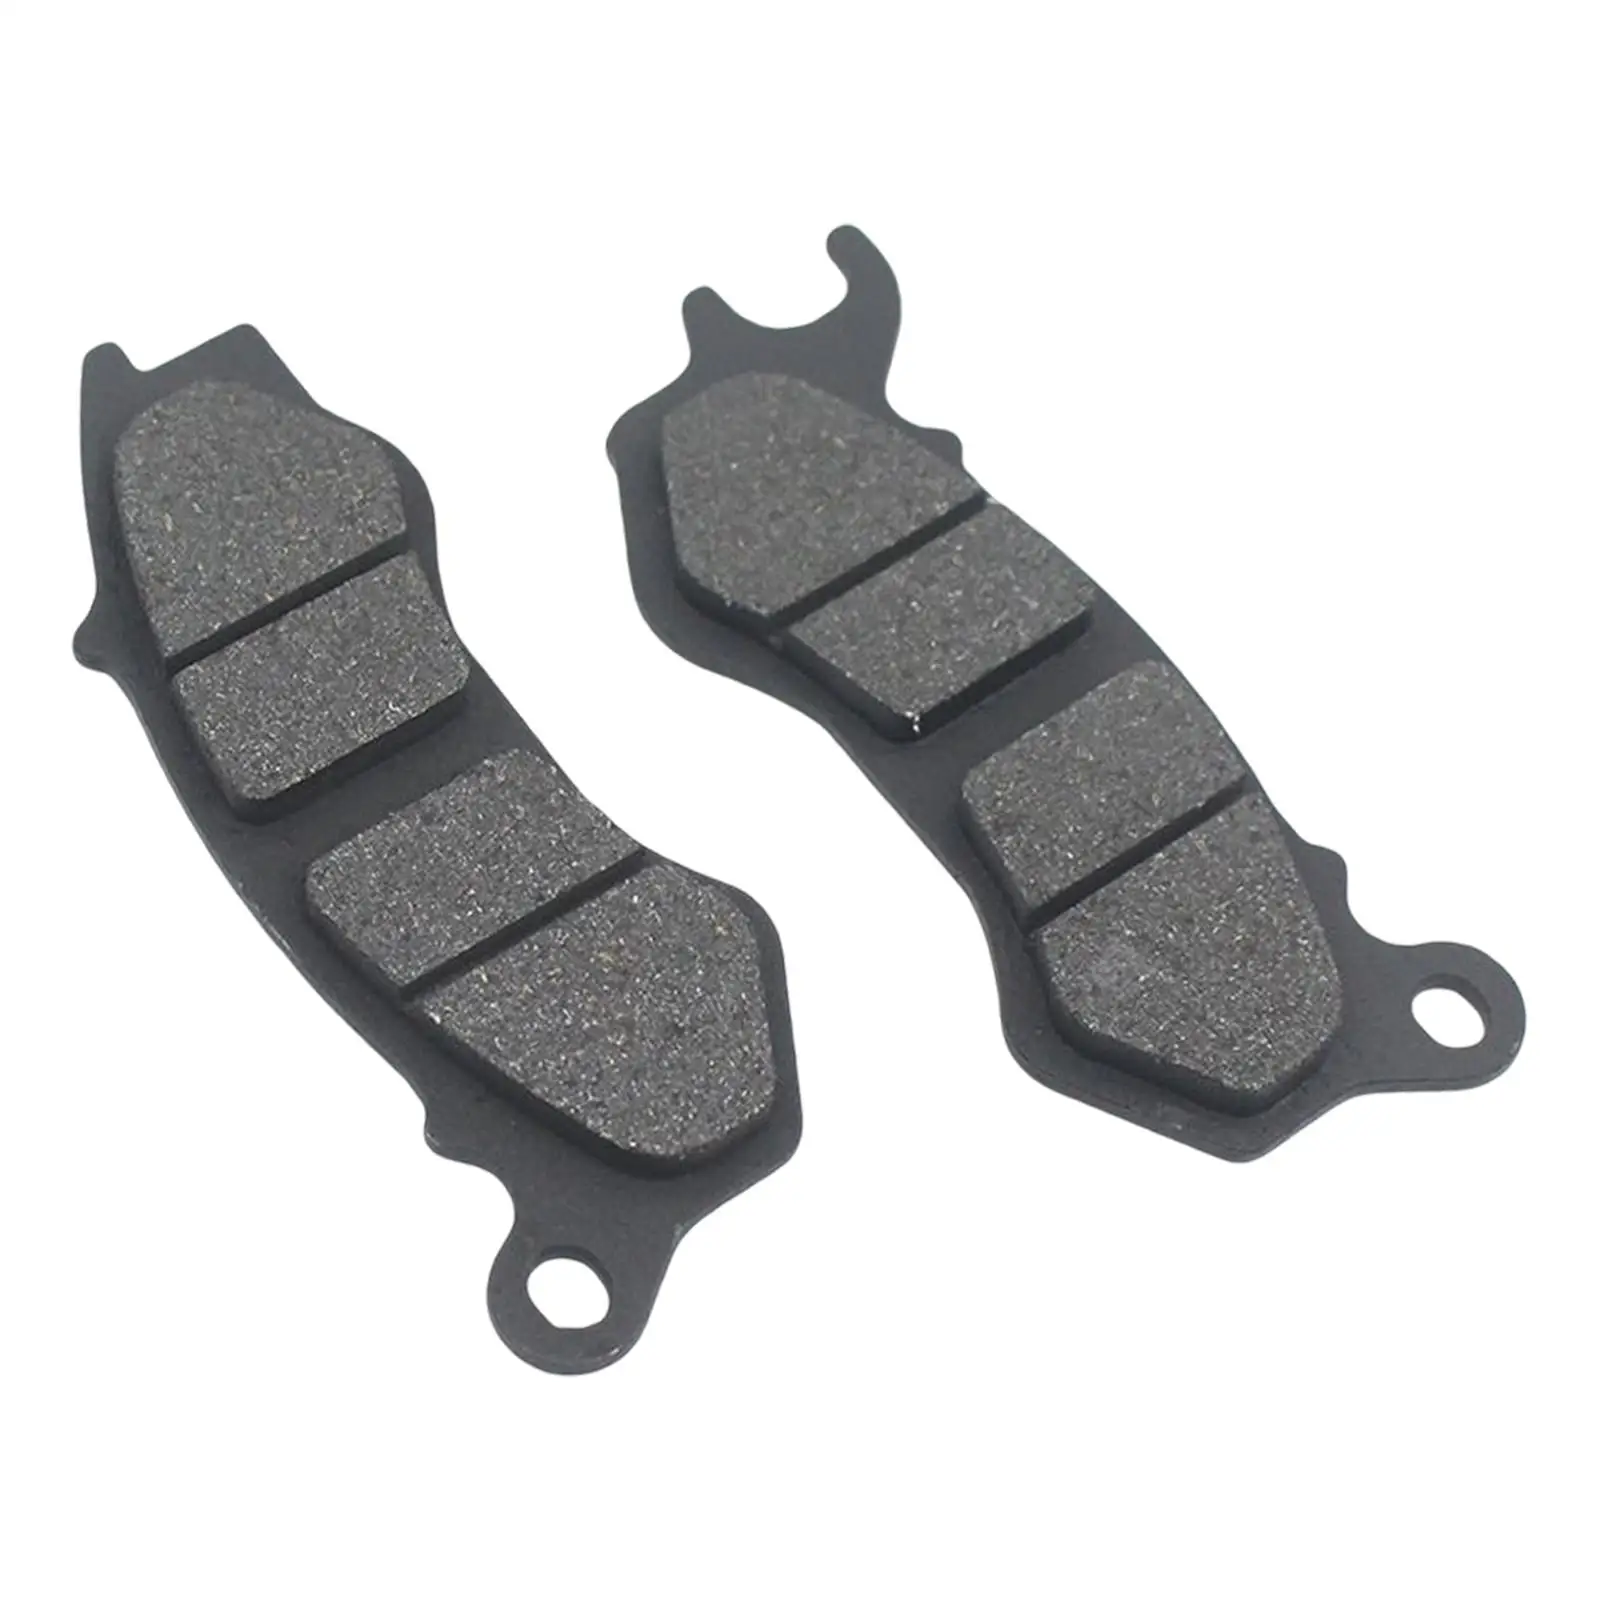 Front Brake Pads for Honda PCX 125 150 - High-Quality Wood Material, Eas... - £16.21 GBP